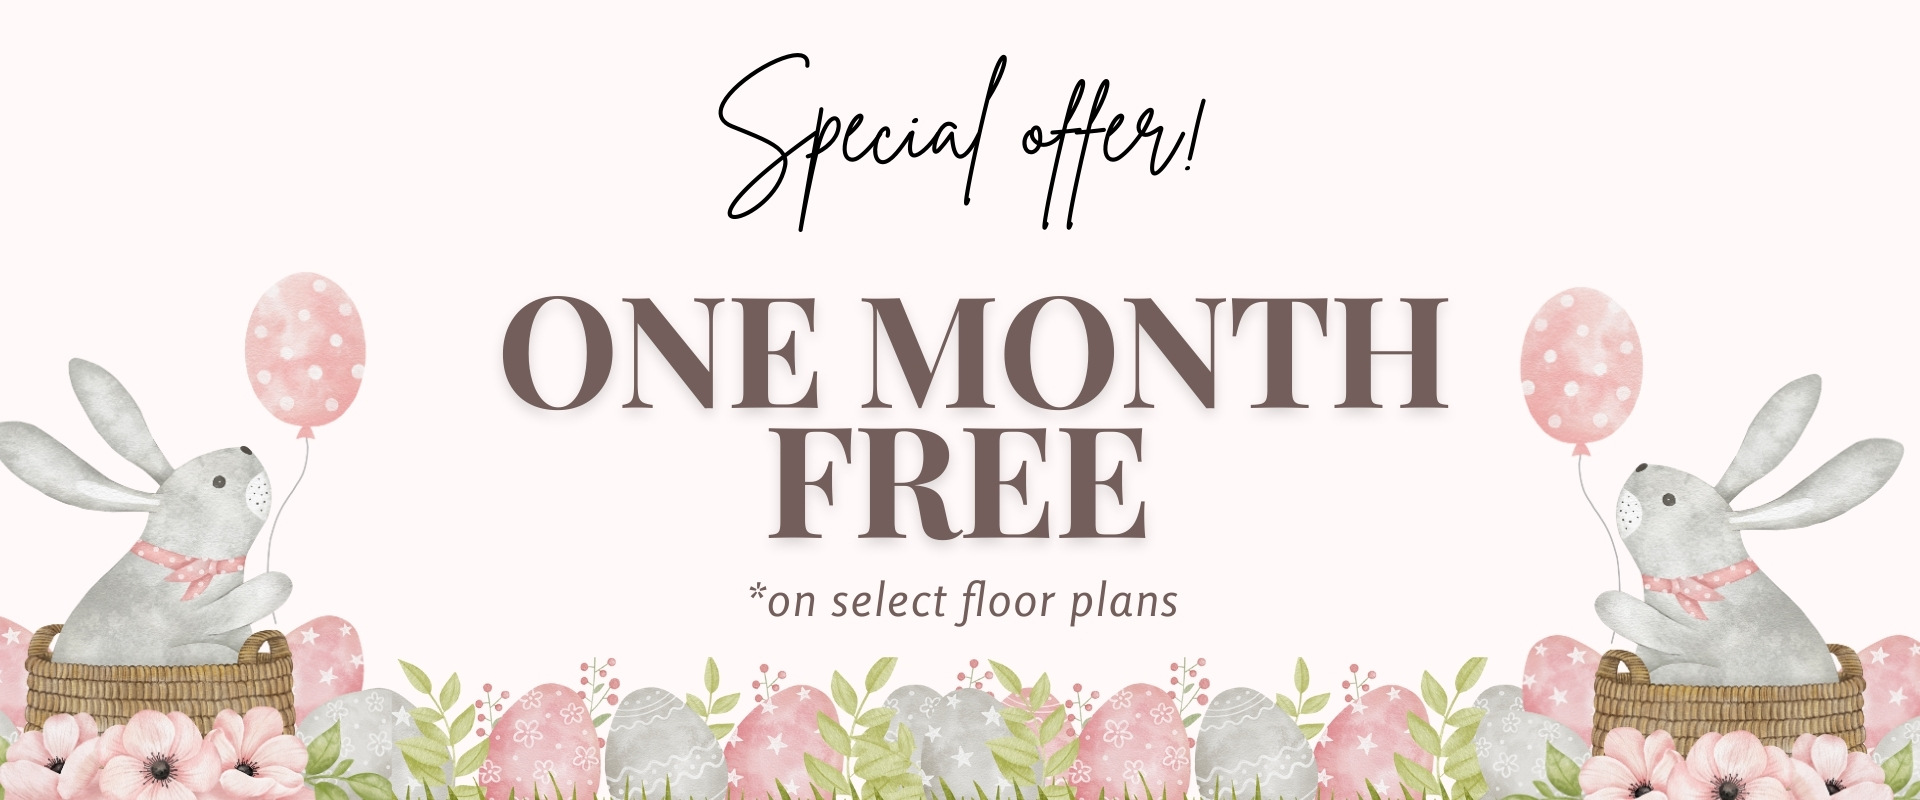 one month free on select floor plans